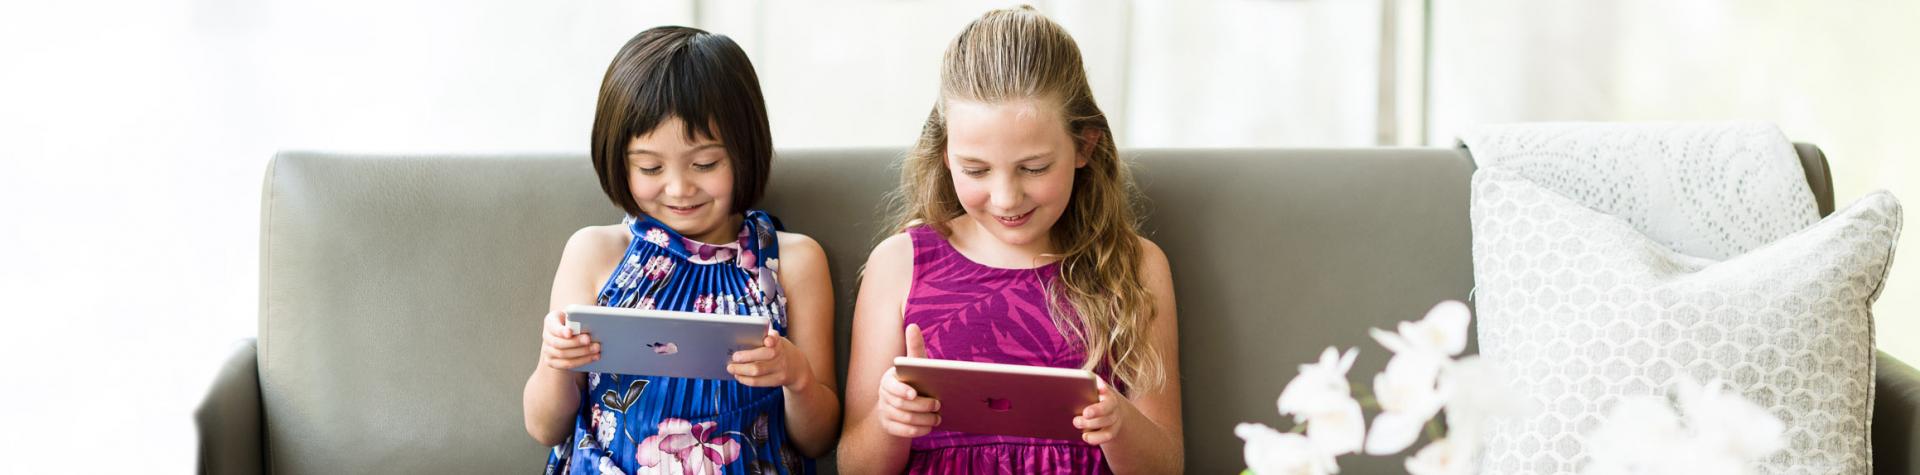 Two children learning music on a tablet